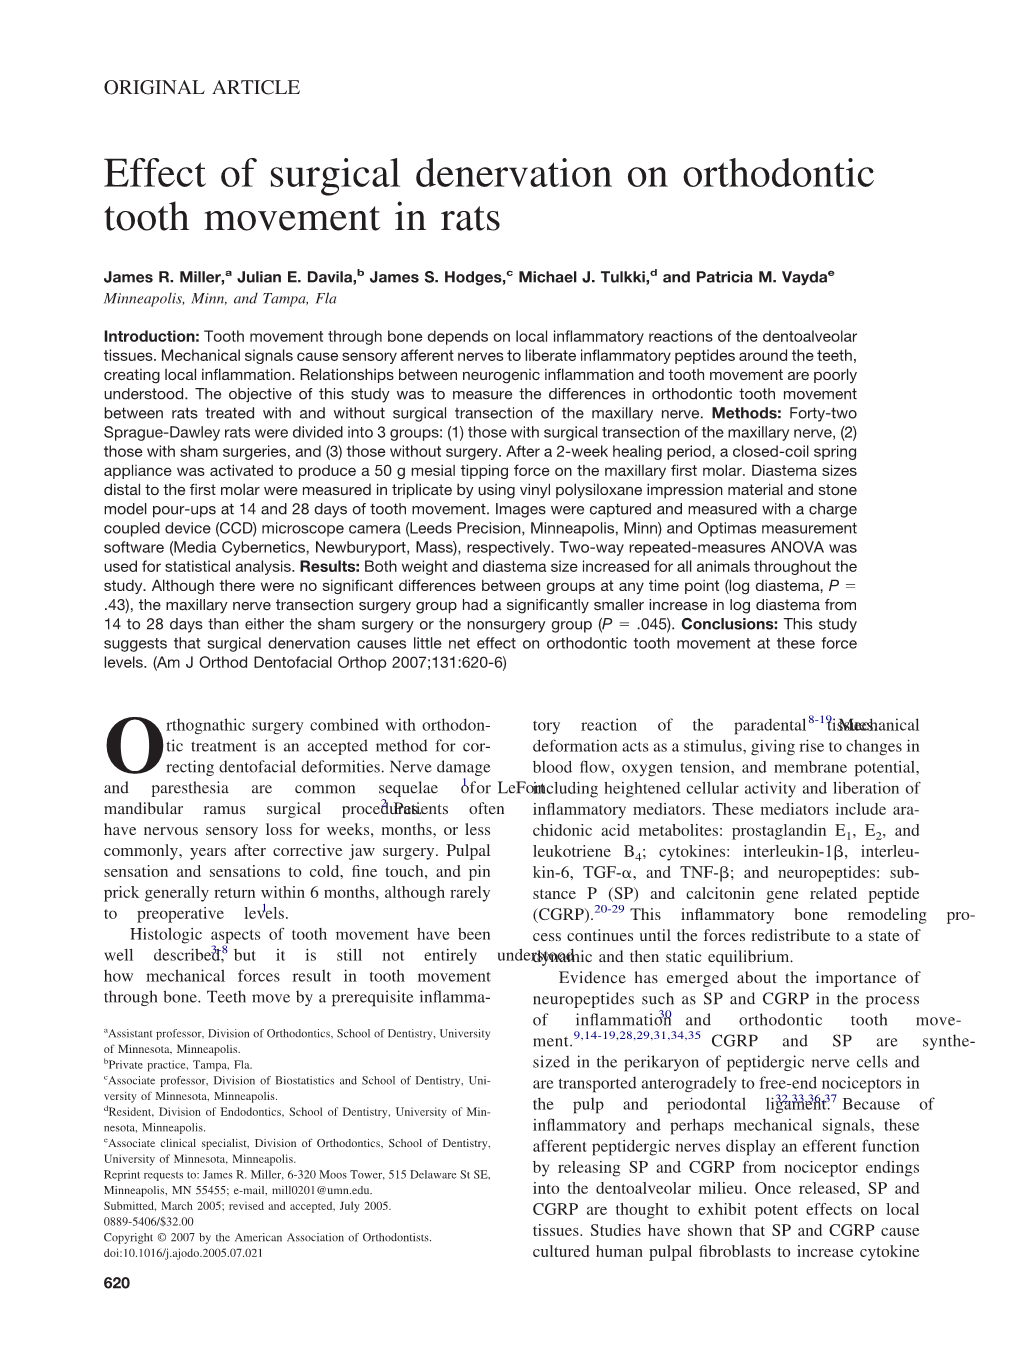 Effect of Surgical Denervation on Orthodontic Tooth Movement in Rats